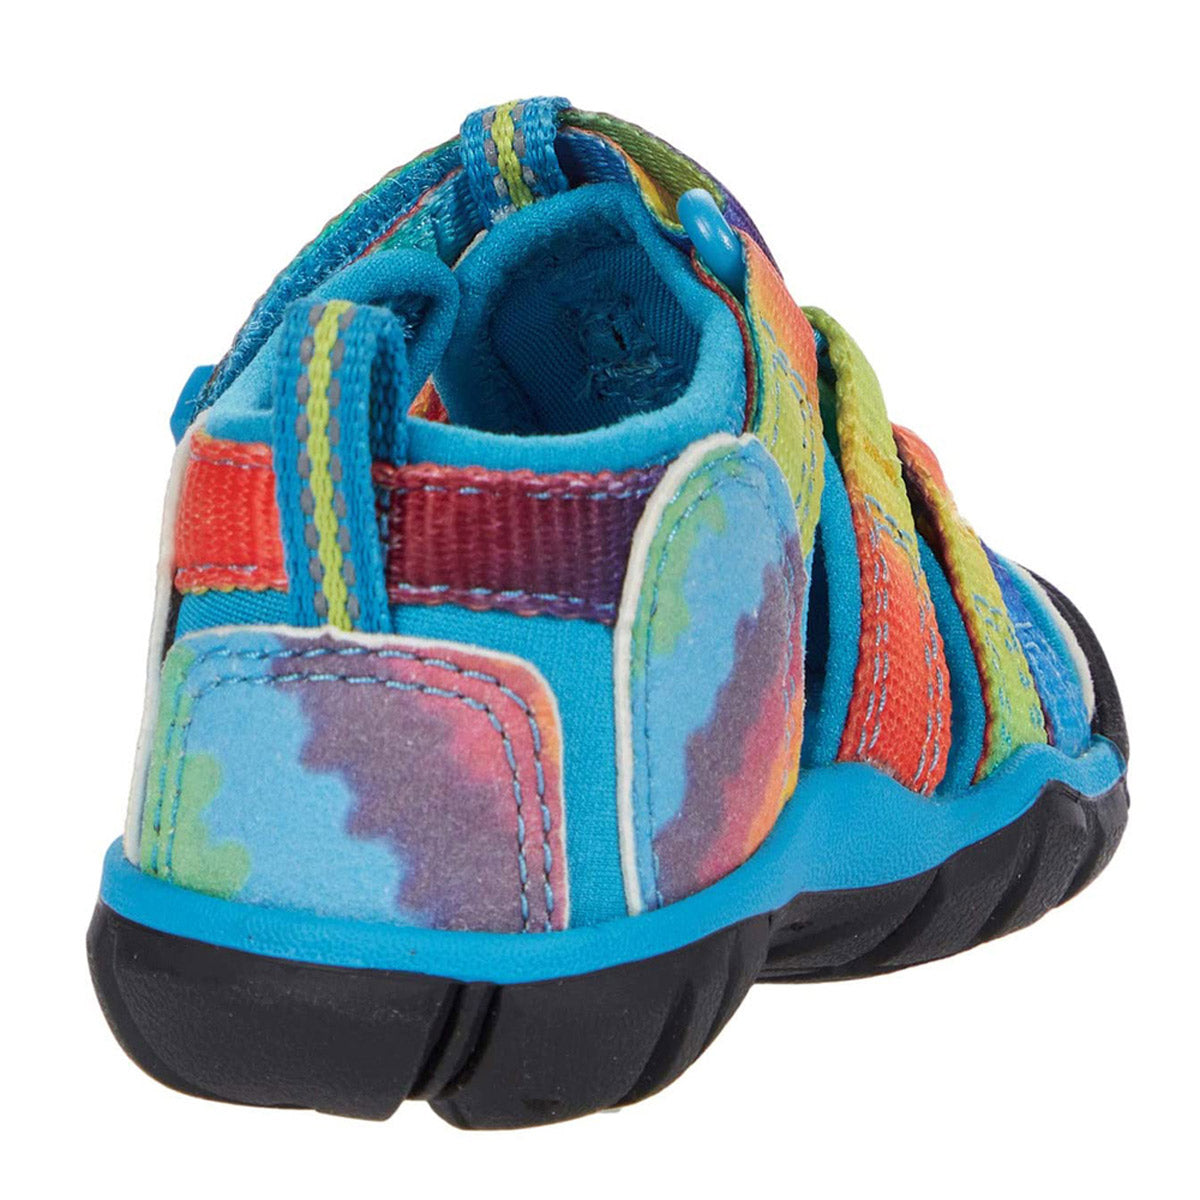 Colorful Keen Child Seacamp II CNX Vivid Blue Tie Dye - Kids hybrid water sandal with Secure Fit Lace Capture System on a white background.